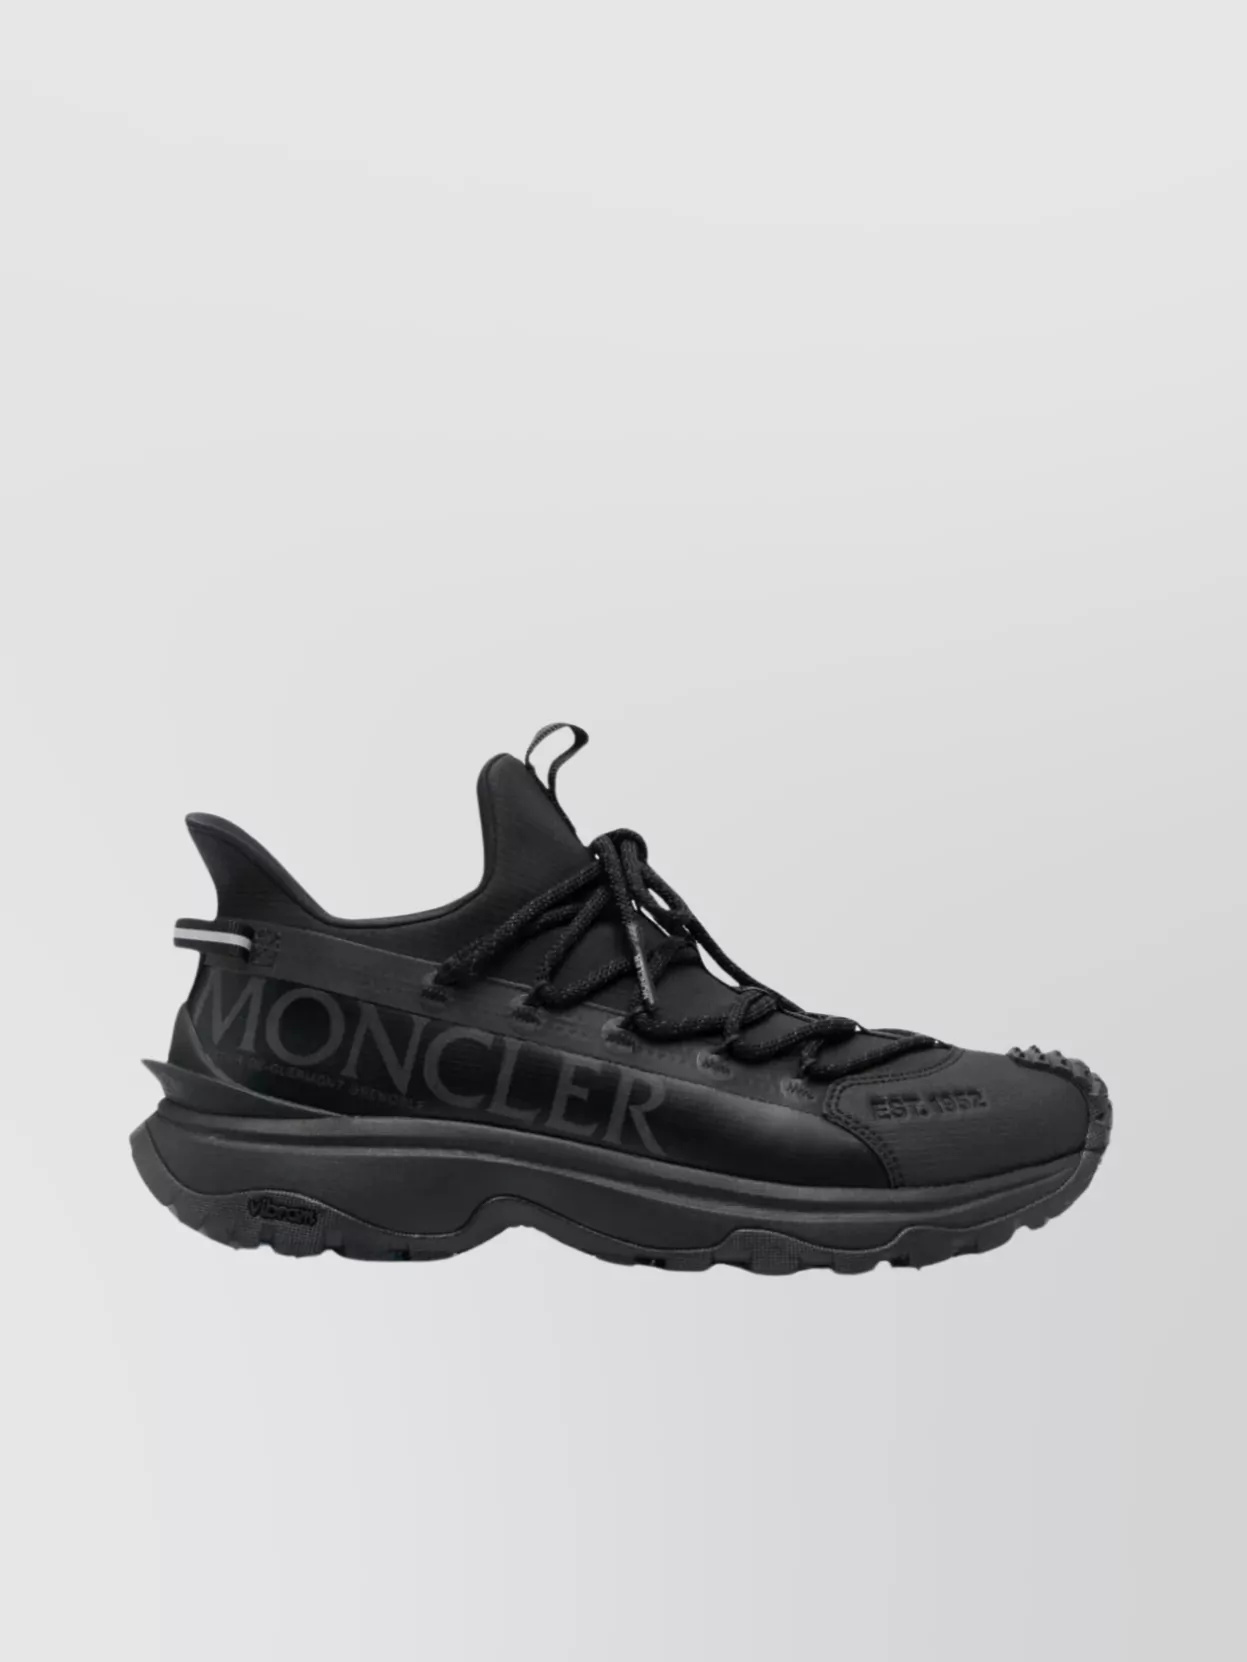 Moncler Durable Grip Trail Sneakers